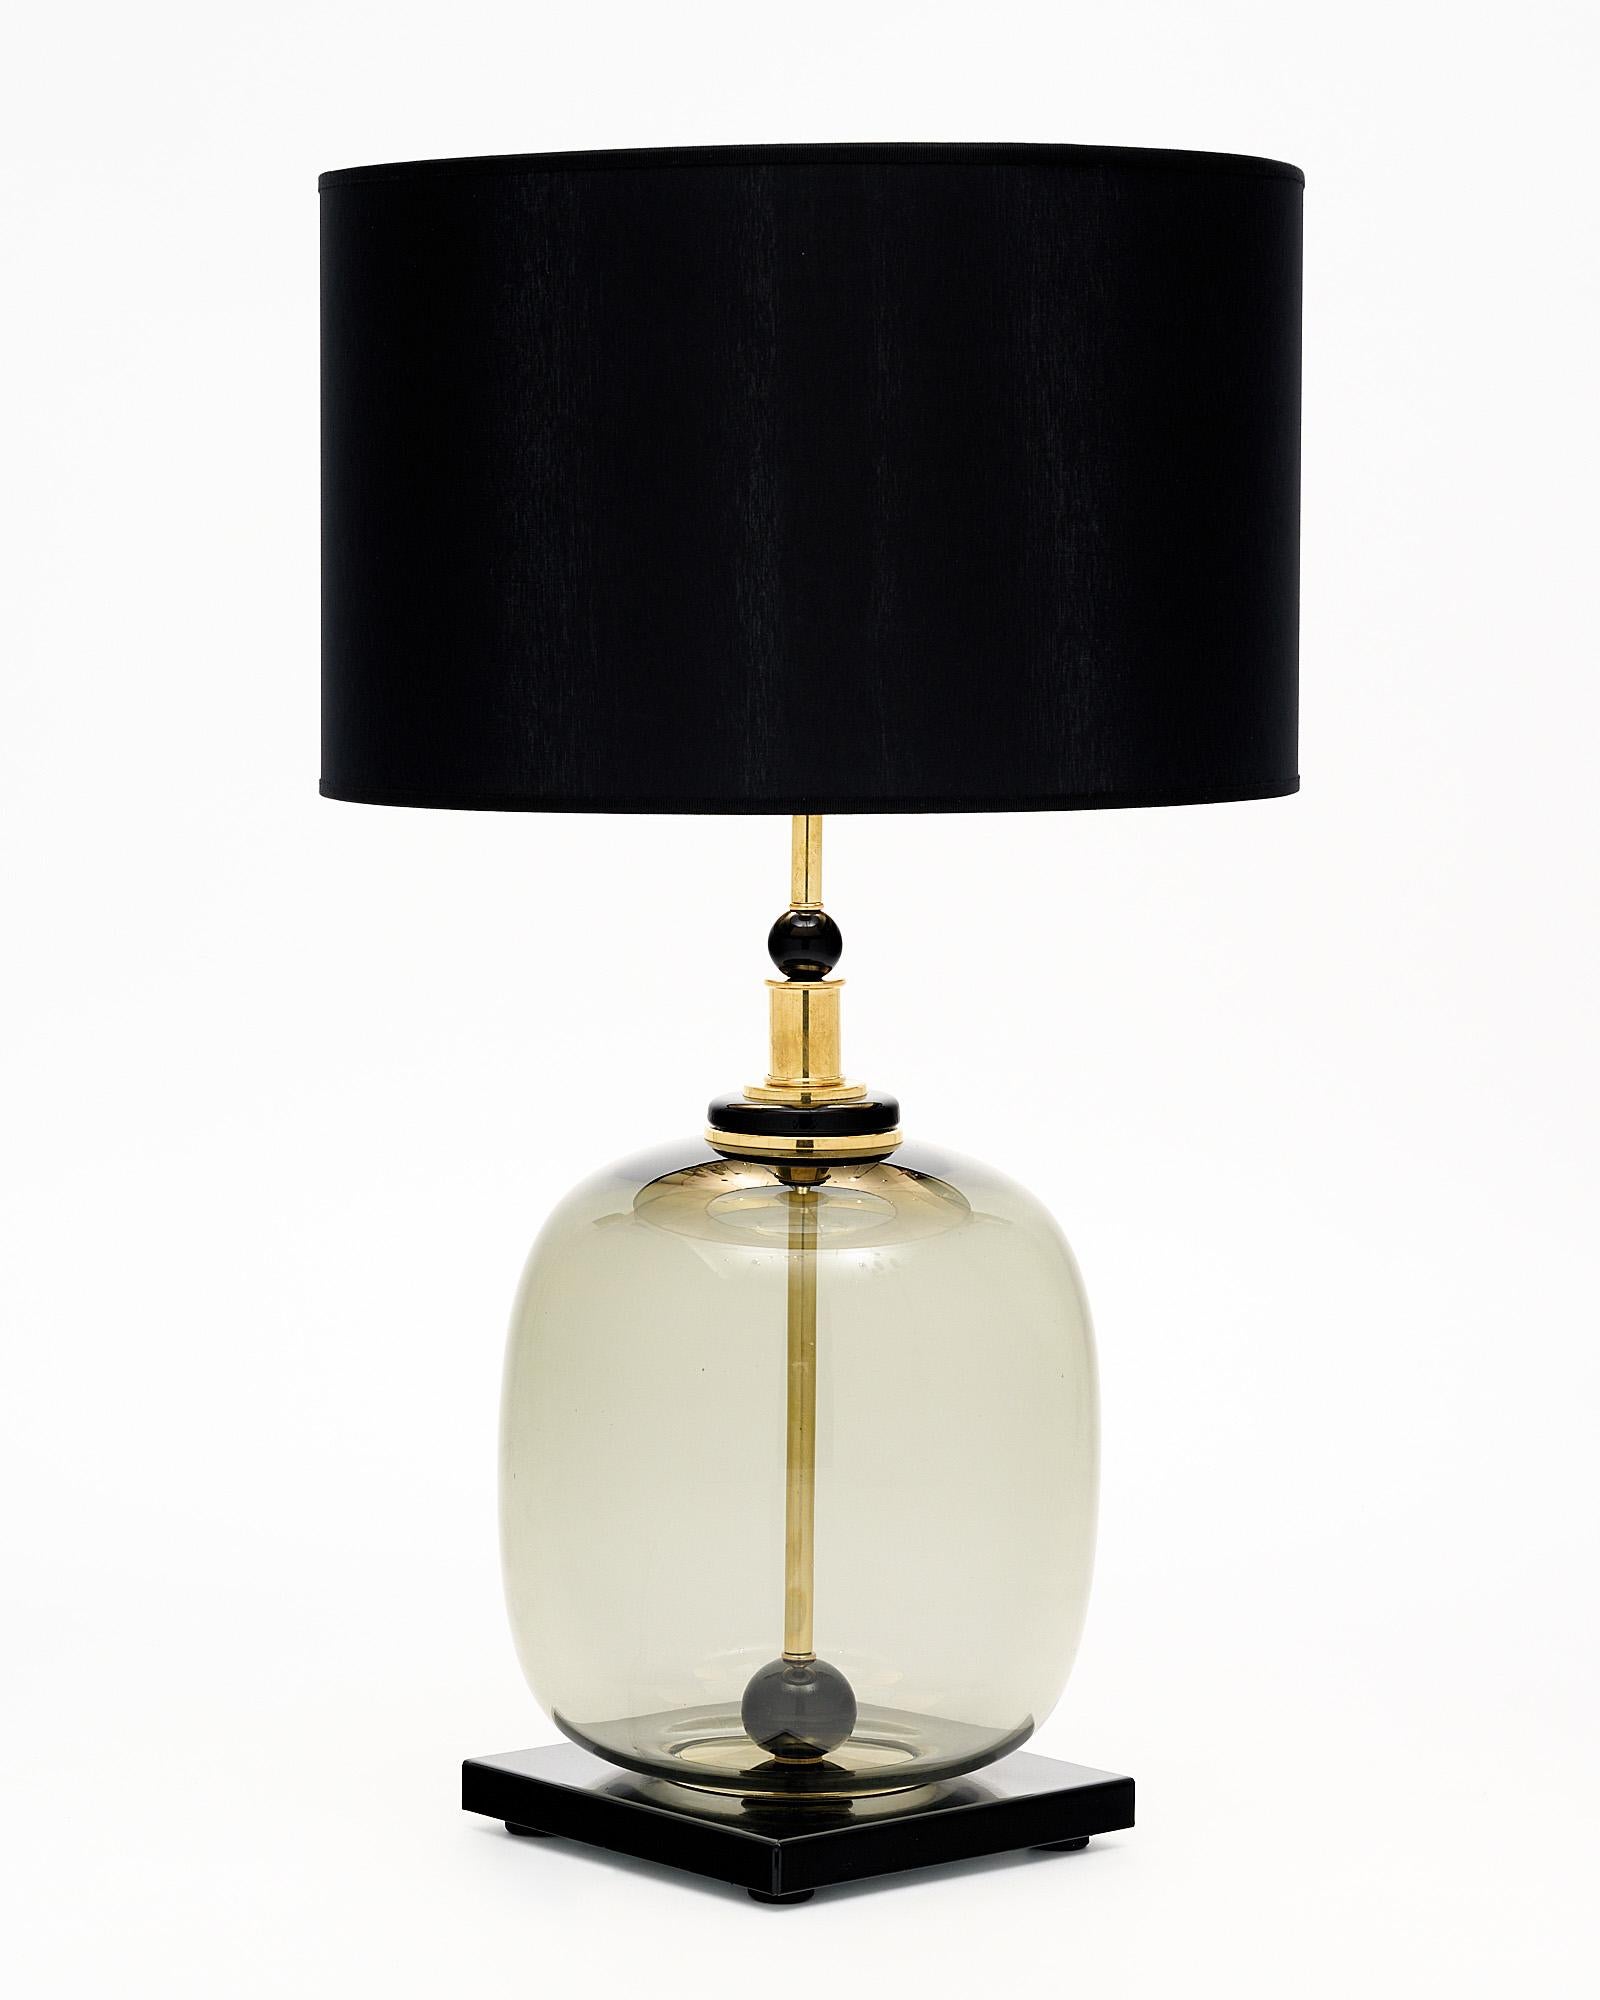 Pair of hand-blown Murano glass lamps featuring unique glass components on a brass structure. In the style of iconic Italian designer Ettore Sotsass. We love the geometric forms and strong impact this pair brings to a space. We love the contrast of